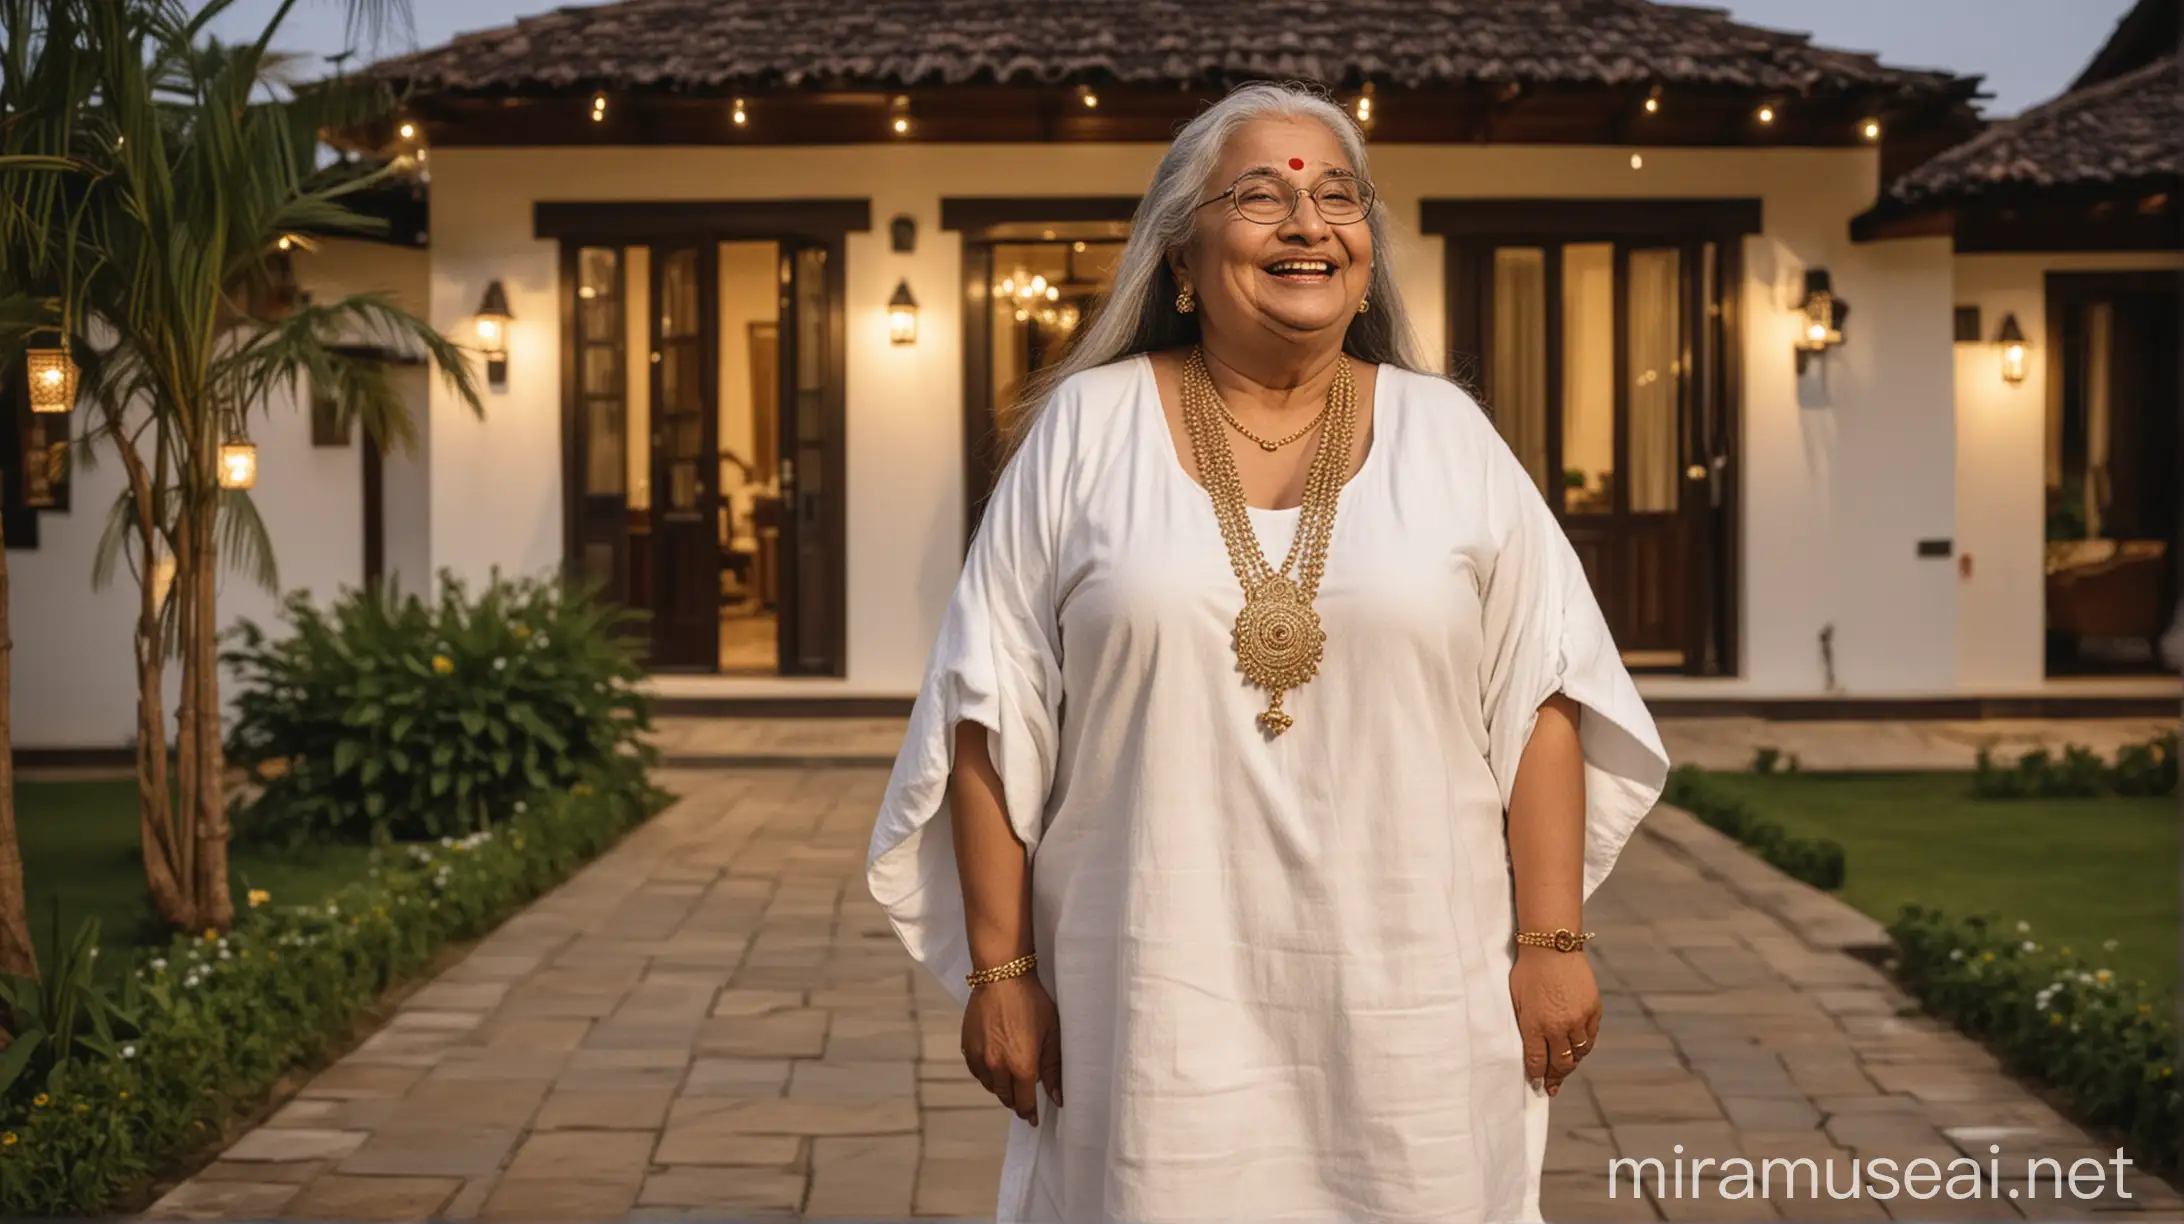 desi  good looking fat granny with thick long hair and wearing bindi happy and laughing standing in luxurious farm house wearing only a  white towel and high heels on feet , a gold necklace a spectacles on eyes  at night in a luxurious court yard ,in background there is a luxurious farm house with a 25 years muscular man 
